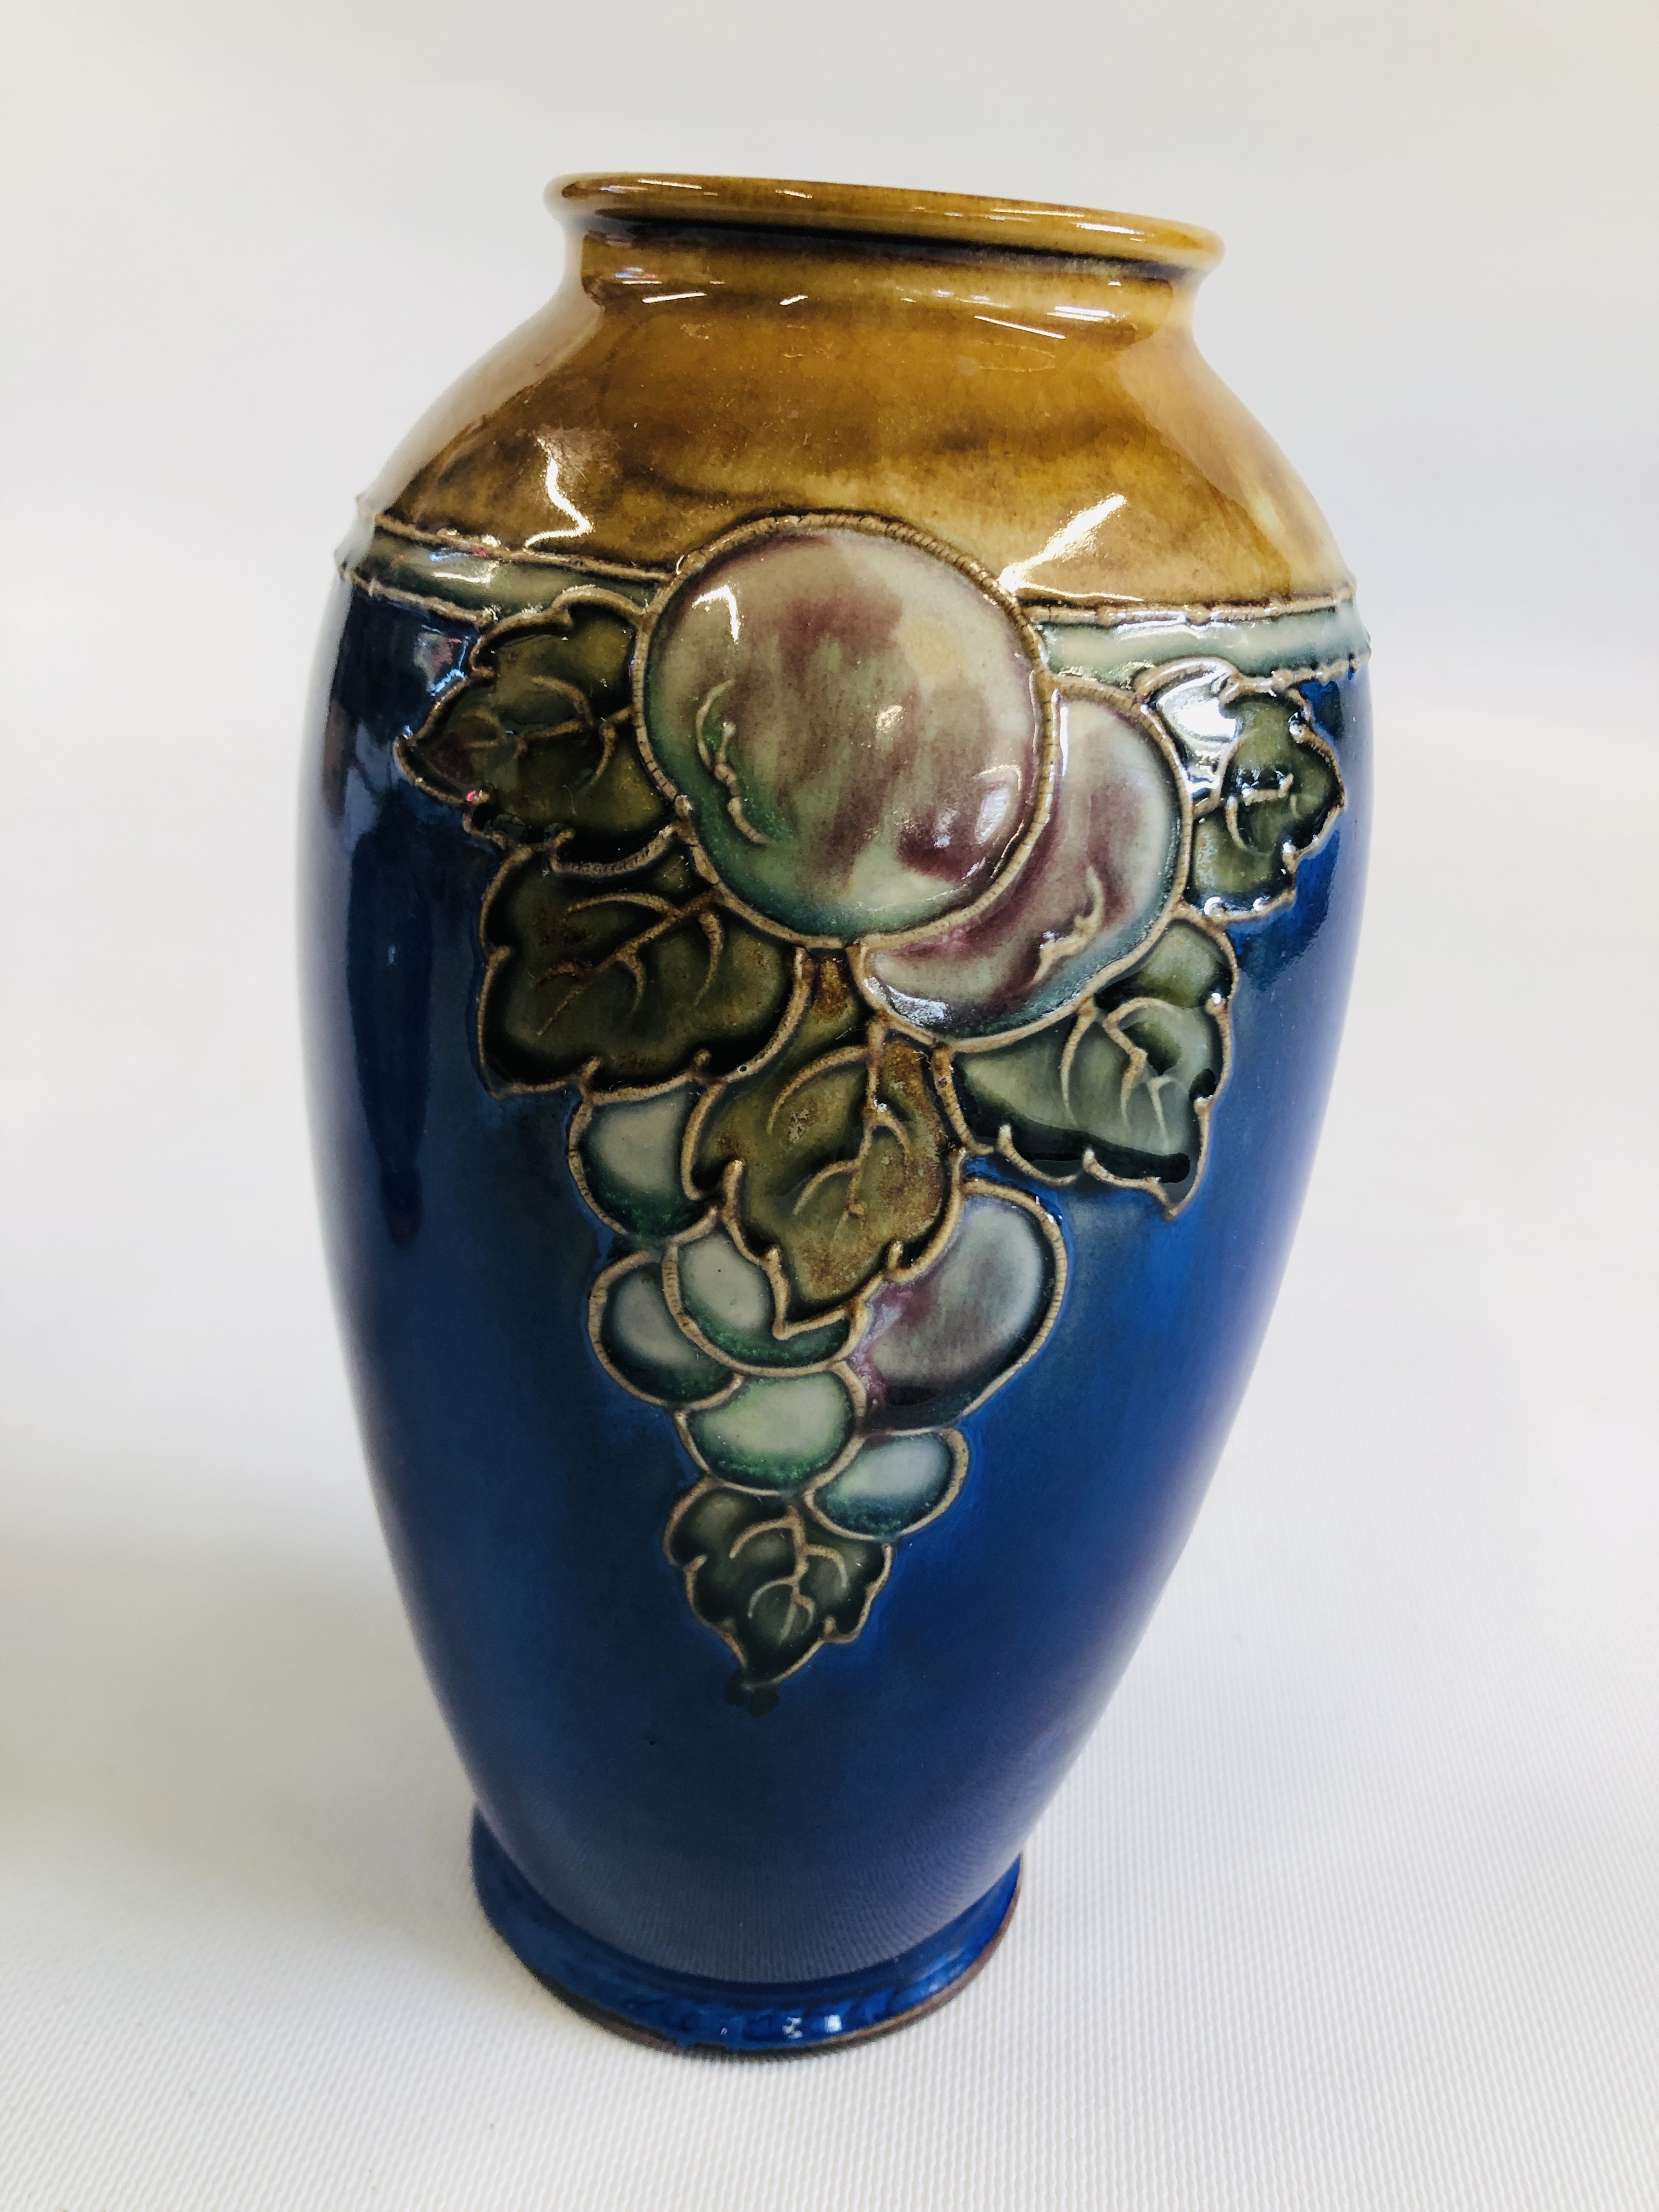 A ROYAL DOULTON VASE SIGNED TO THE BASE "MB" HAVING RIM CHIPS AND HAIR LINE H 23CM ALONG WITH A - Image 6 of 9